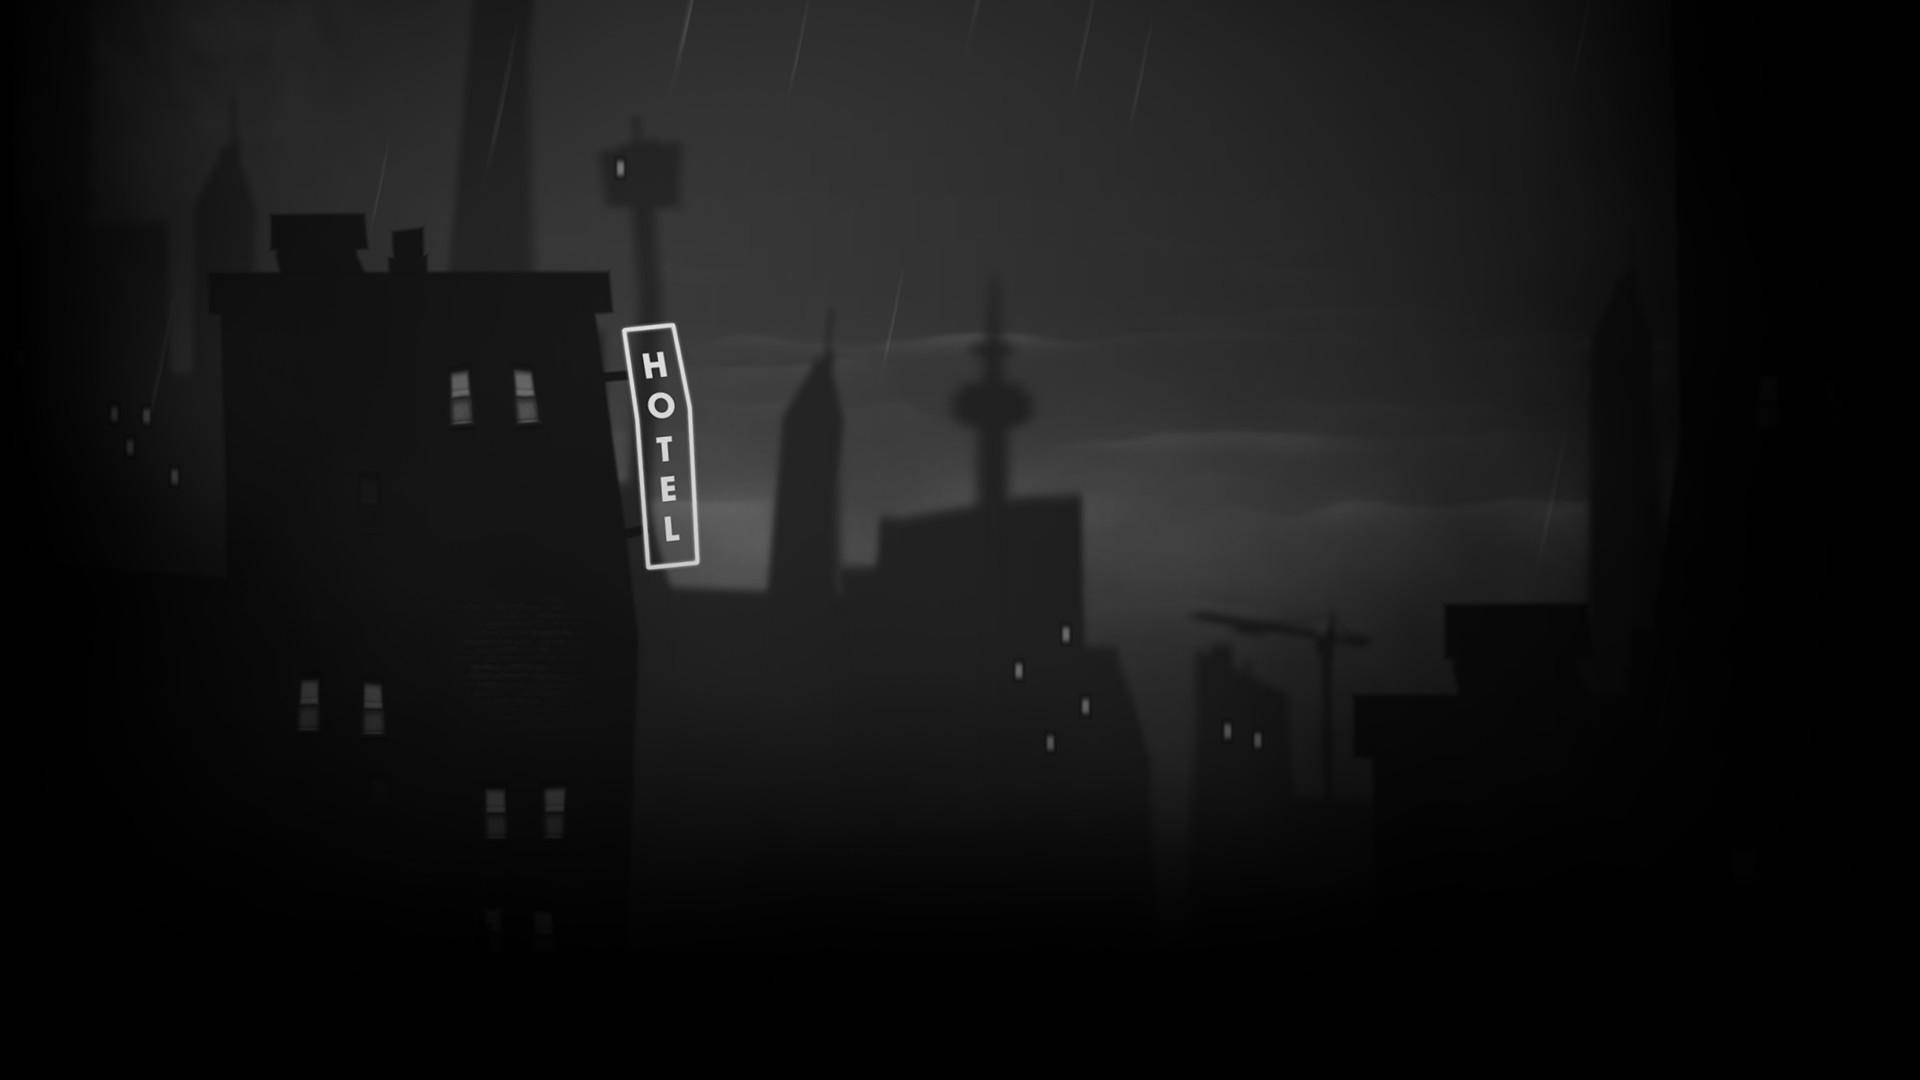 Simple Black City With Hotel Sign